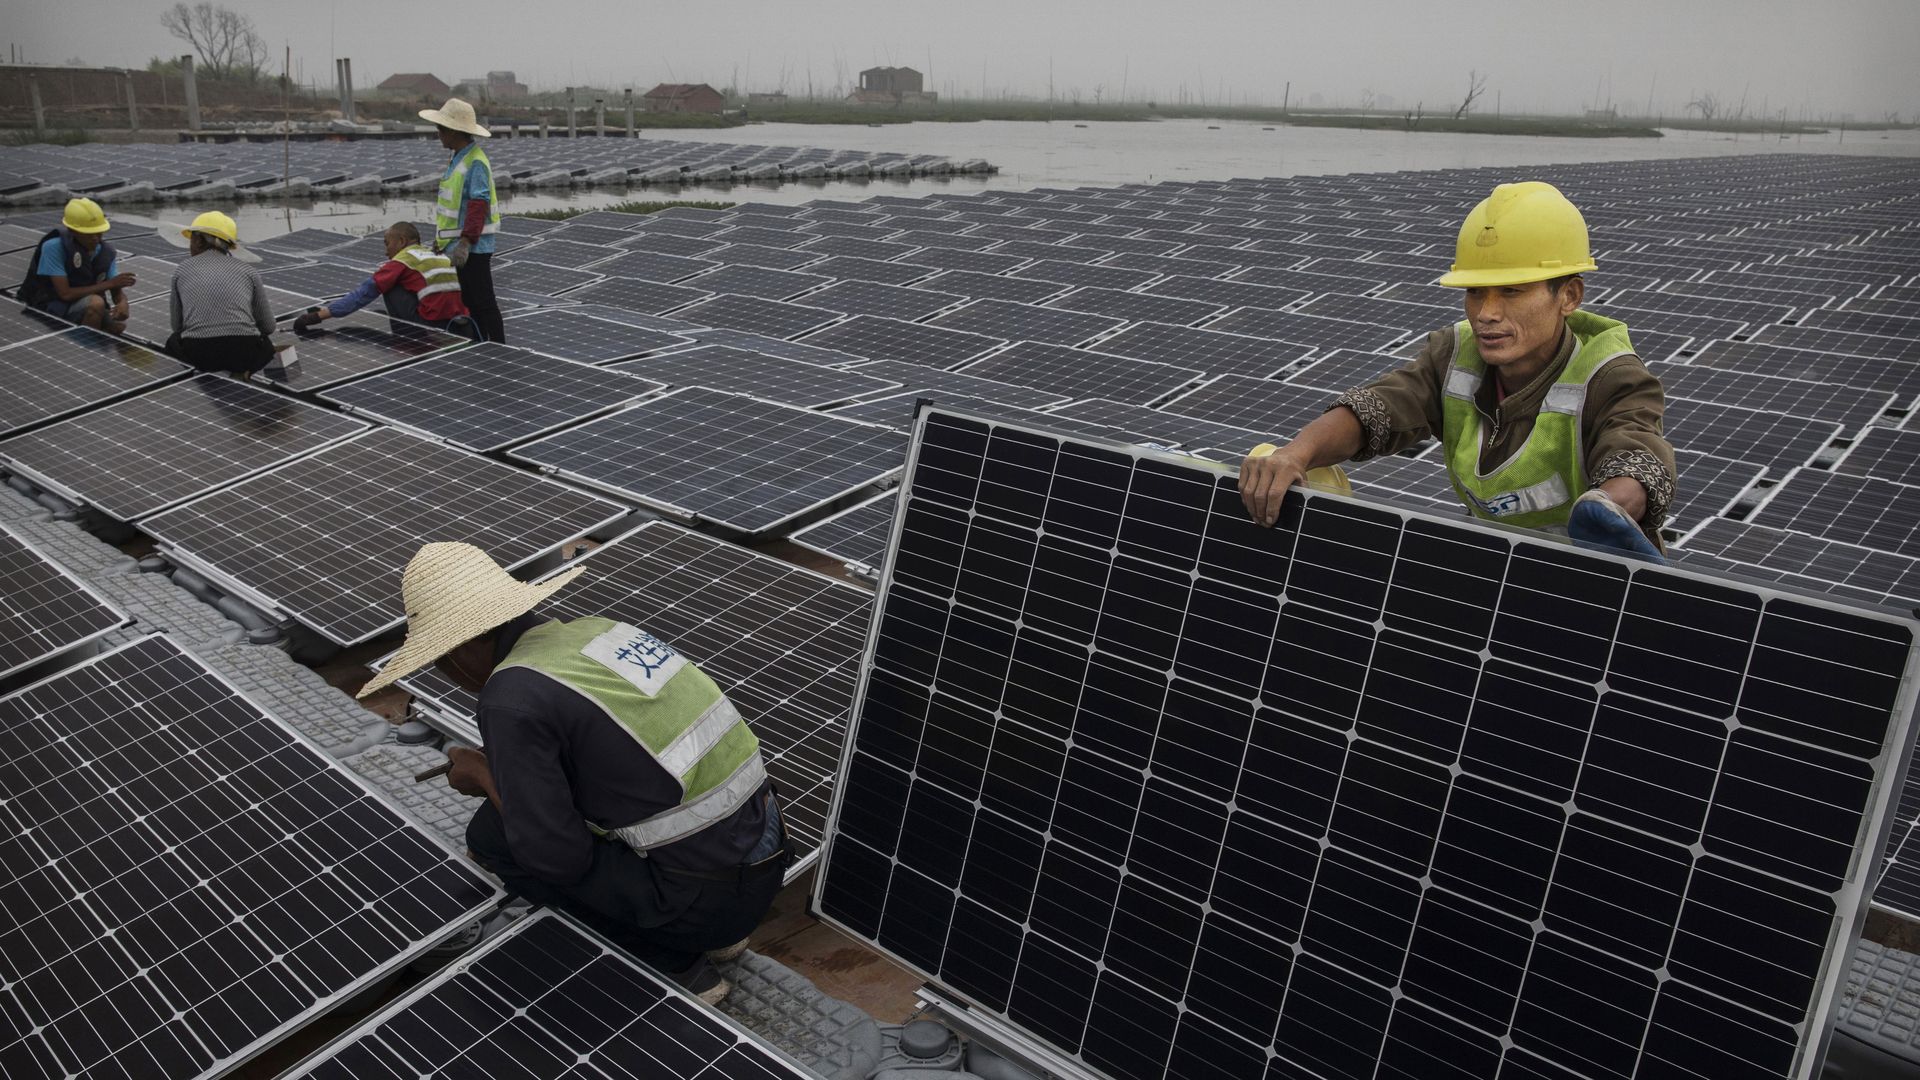 Chinese workers prepare panels that will be part of a large floating solar farm project under construction